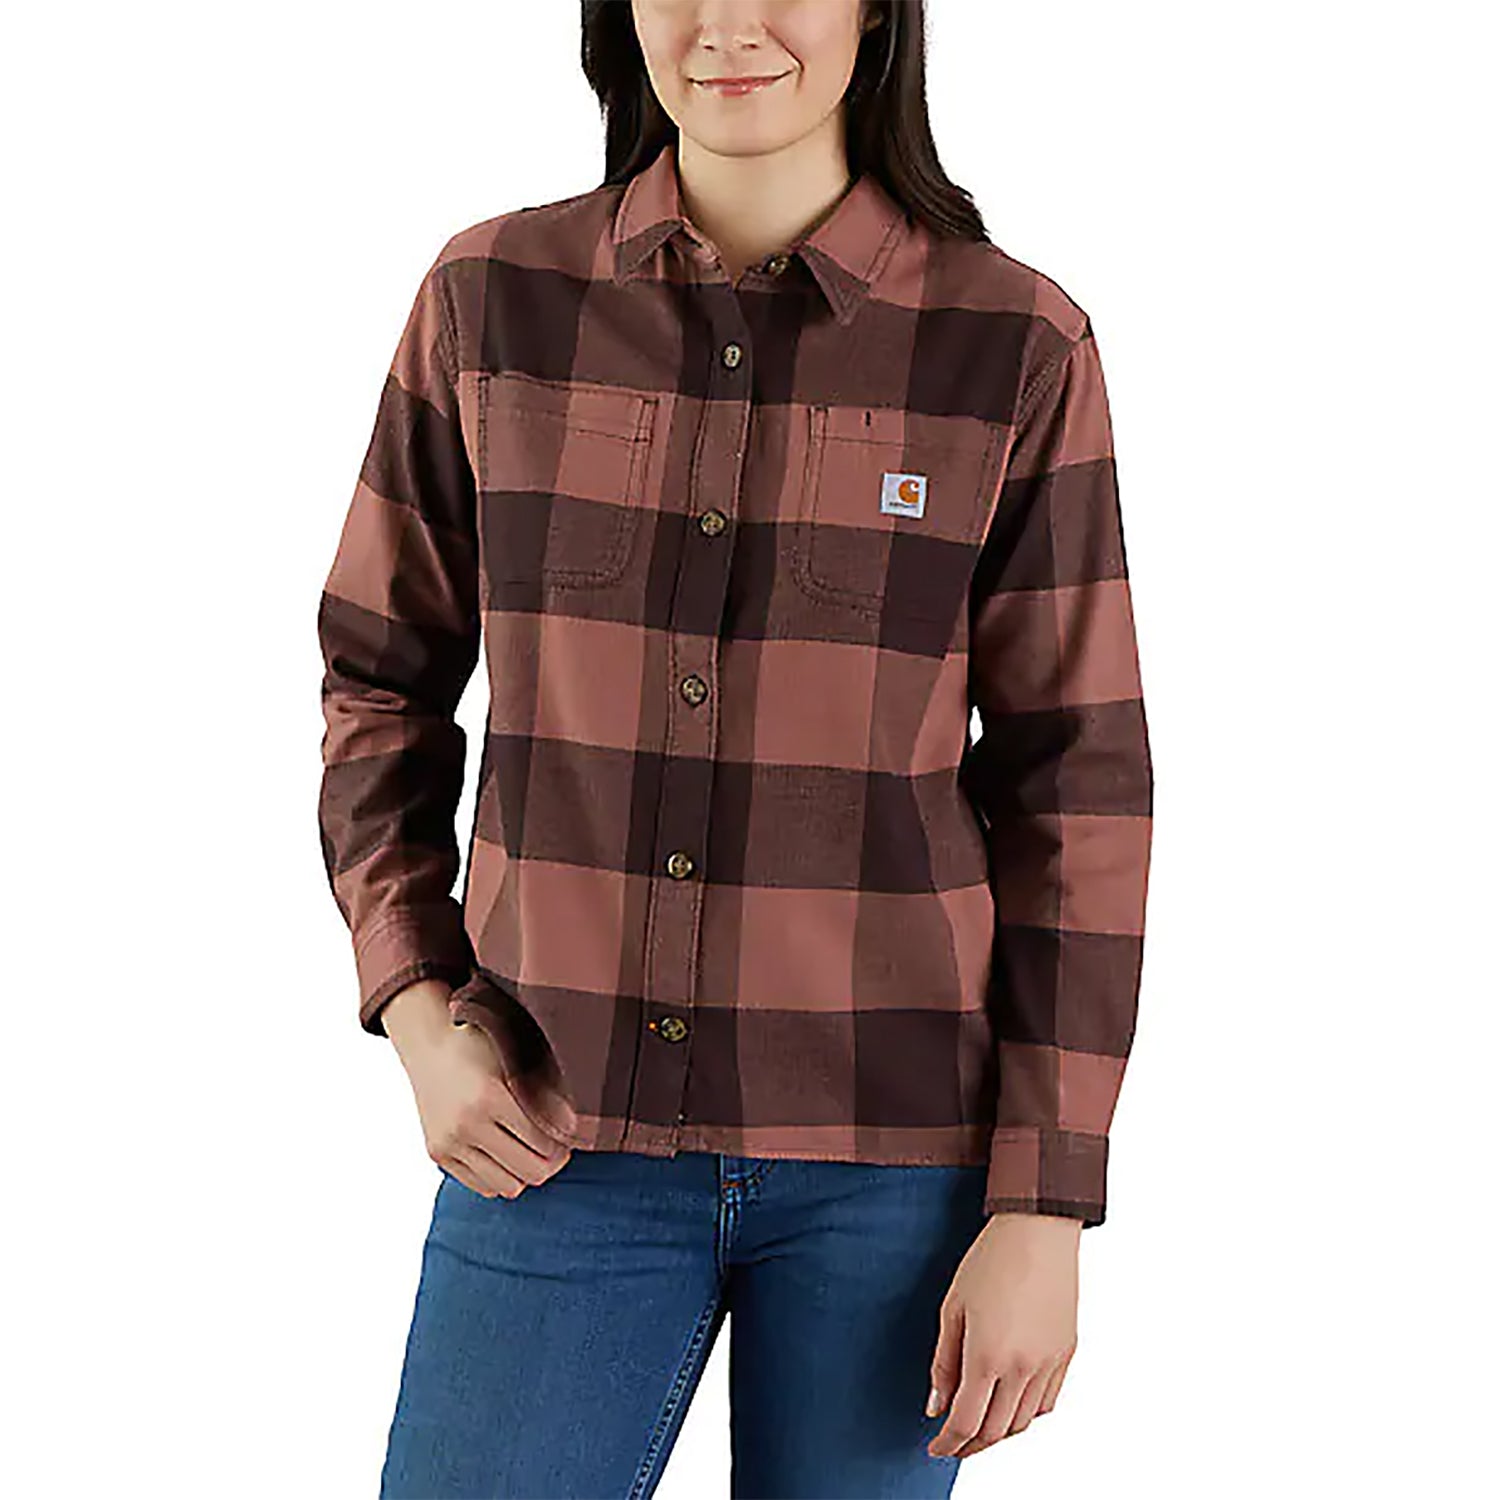 Sportswear by Country Touch Shirt Large Brown Plaid Long Sleeve